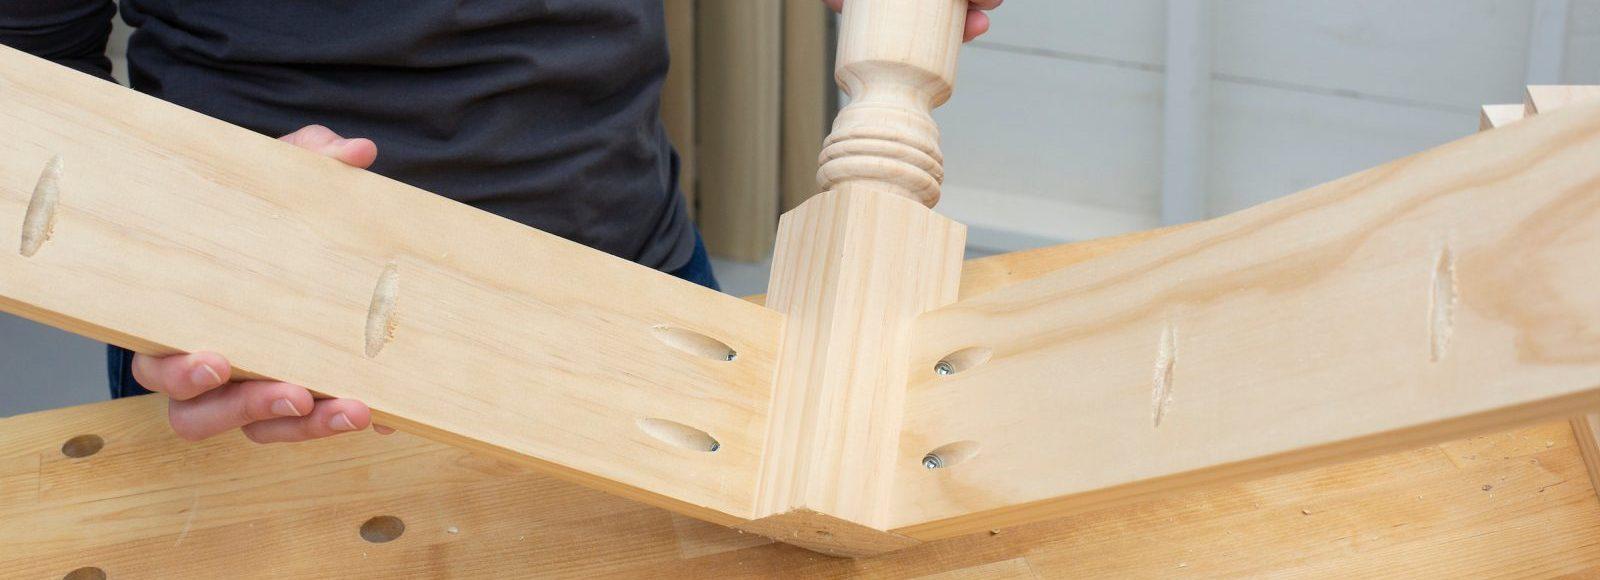 Make 7 simple joints with your pocket-hole jig